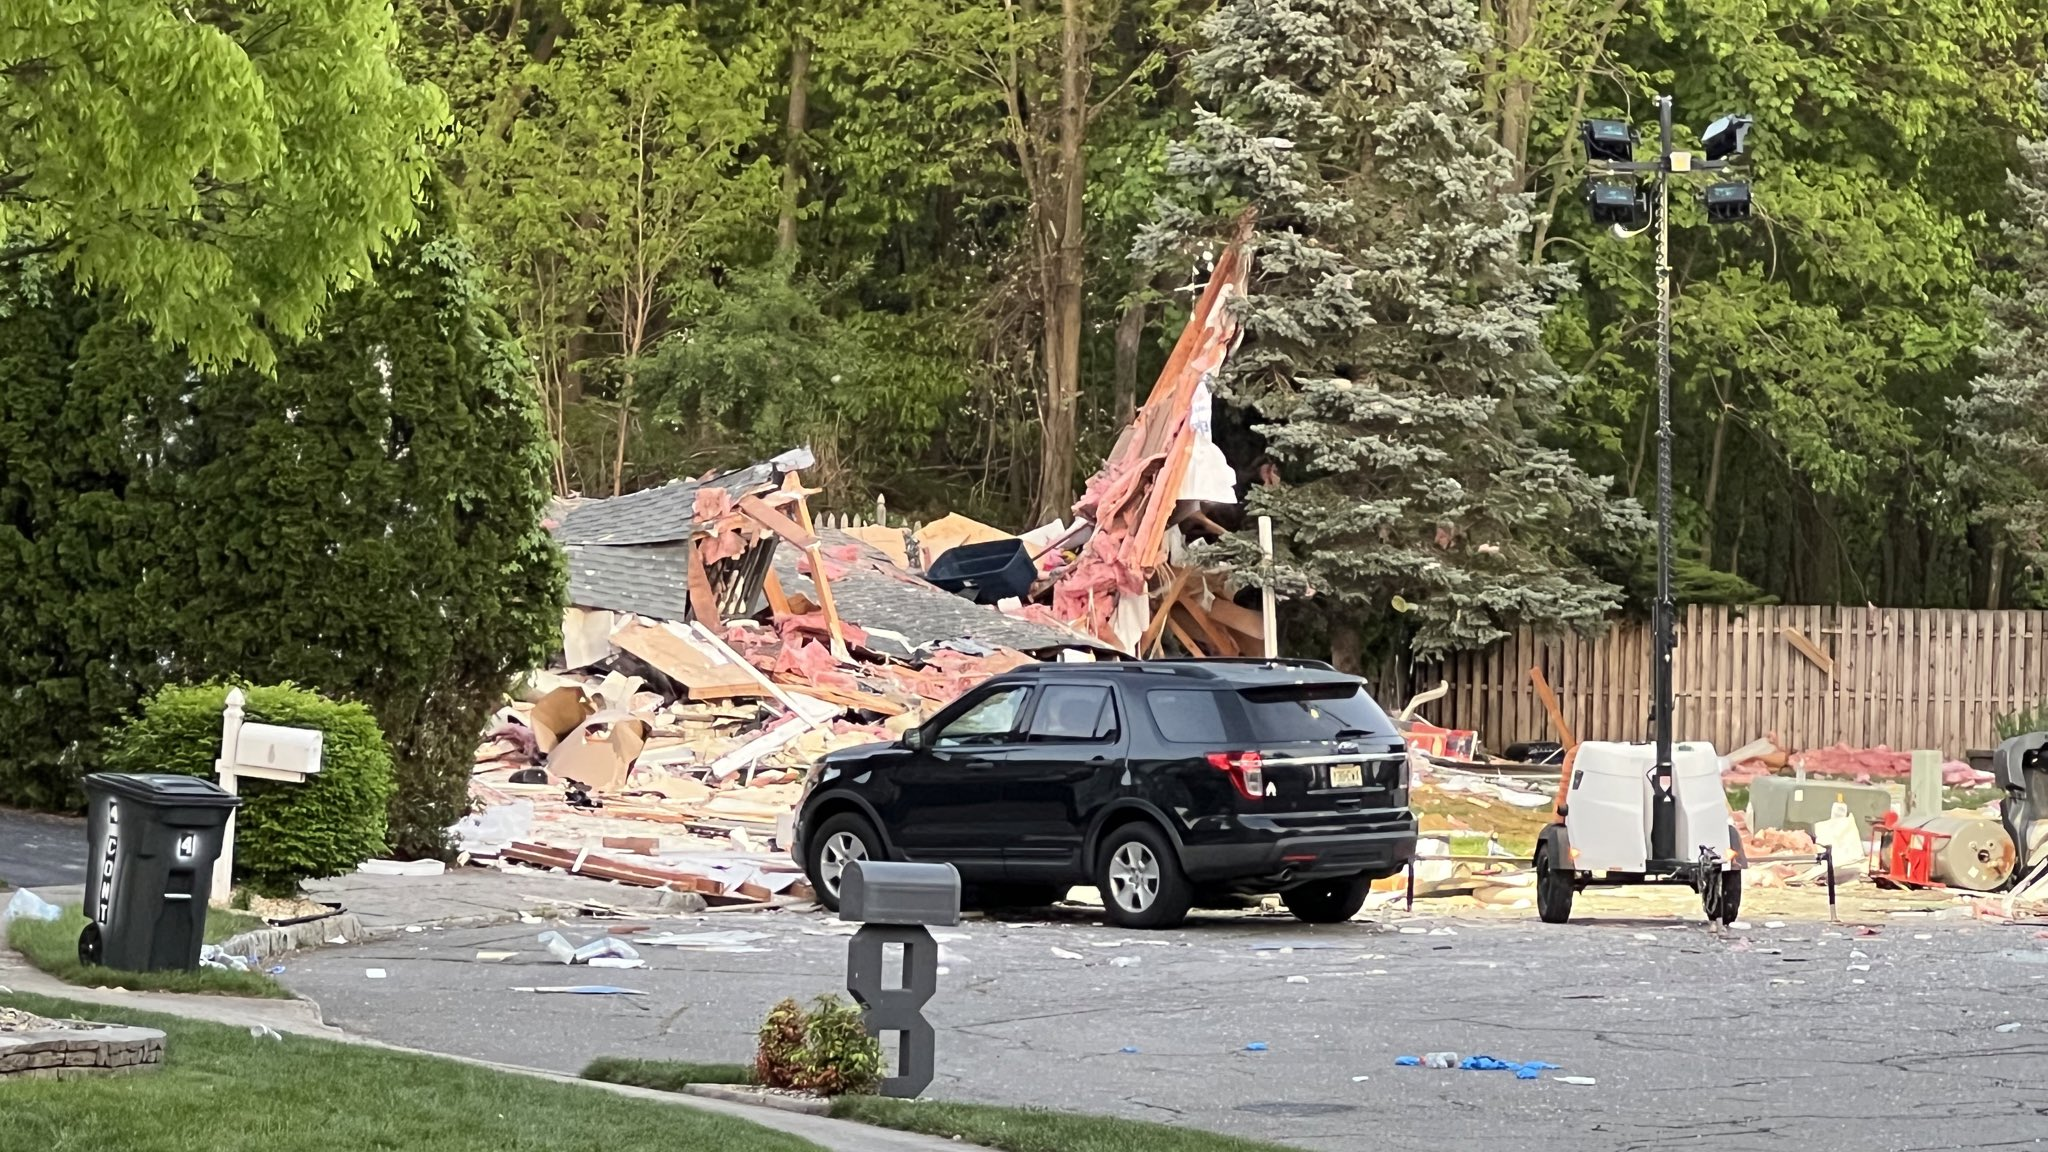 Man killed in New Jersey house explosion